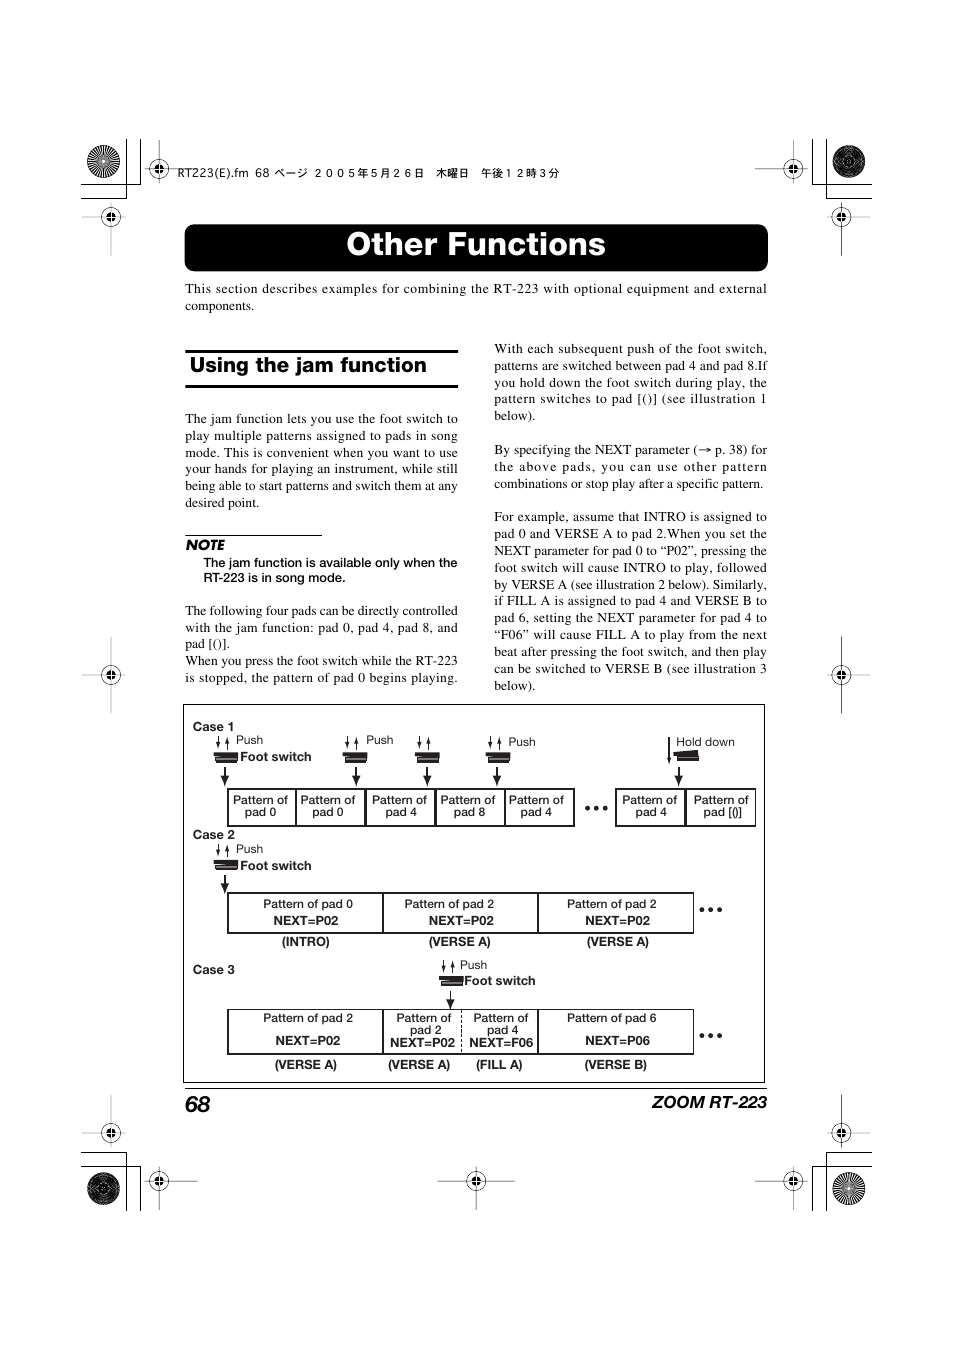 Other functions, Using the jam function | Zoom RT-223 User Manual